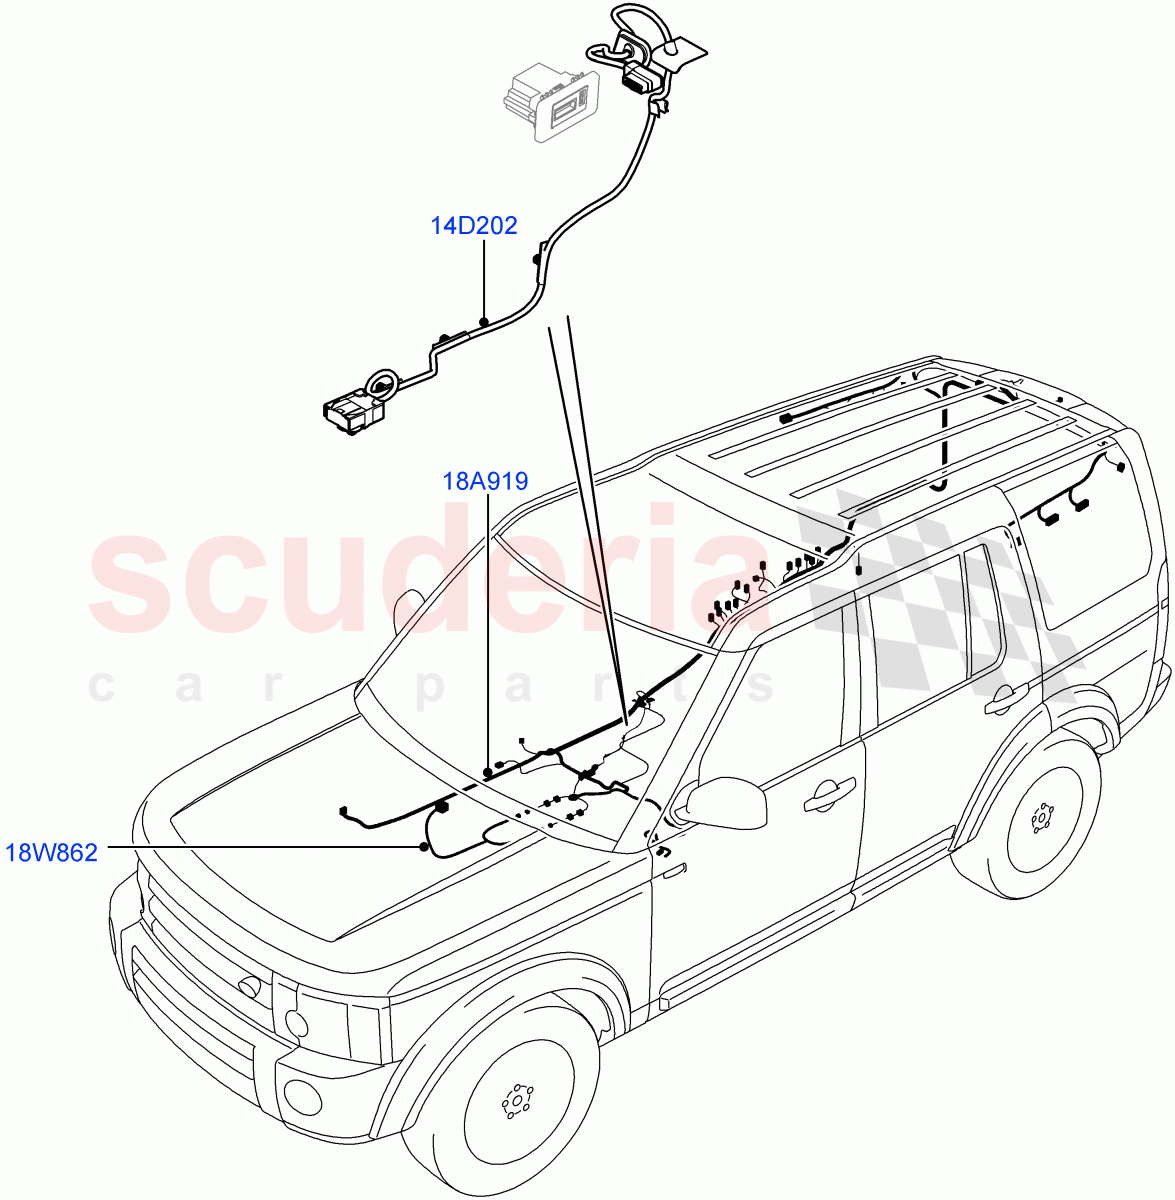 Electrical Wiring - Body And Rear(Audio/Navigation/Entertainment)((V)FROMAA000001,(V)TOAA999999) of Land Rover Land Rover Discovery 4 (2010-2016) [2.7 Diesel V6]